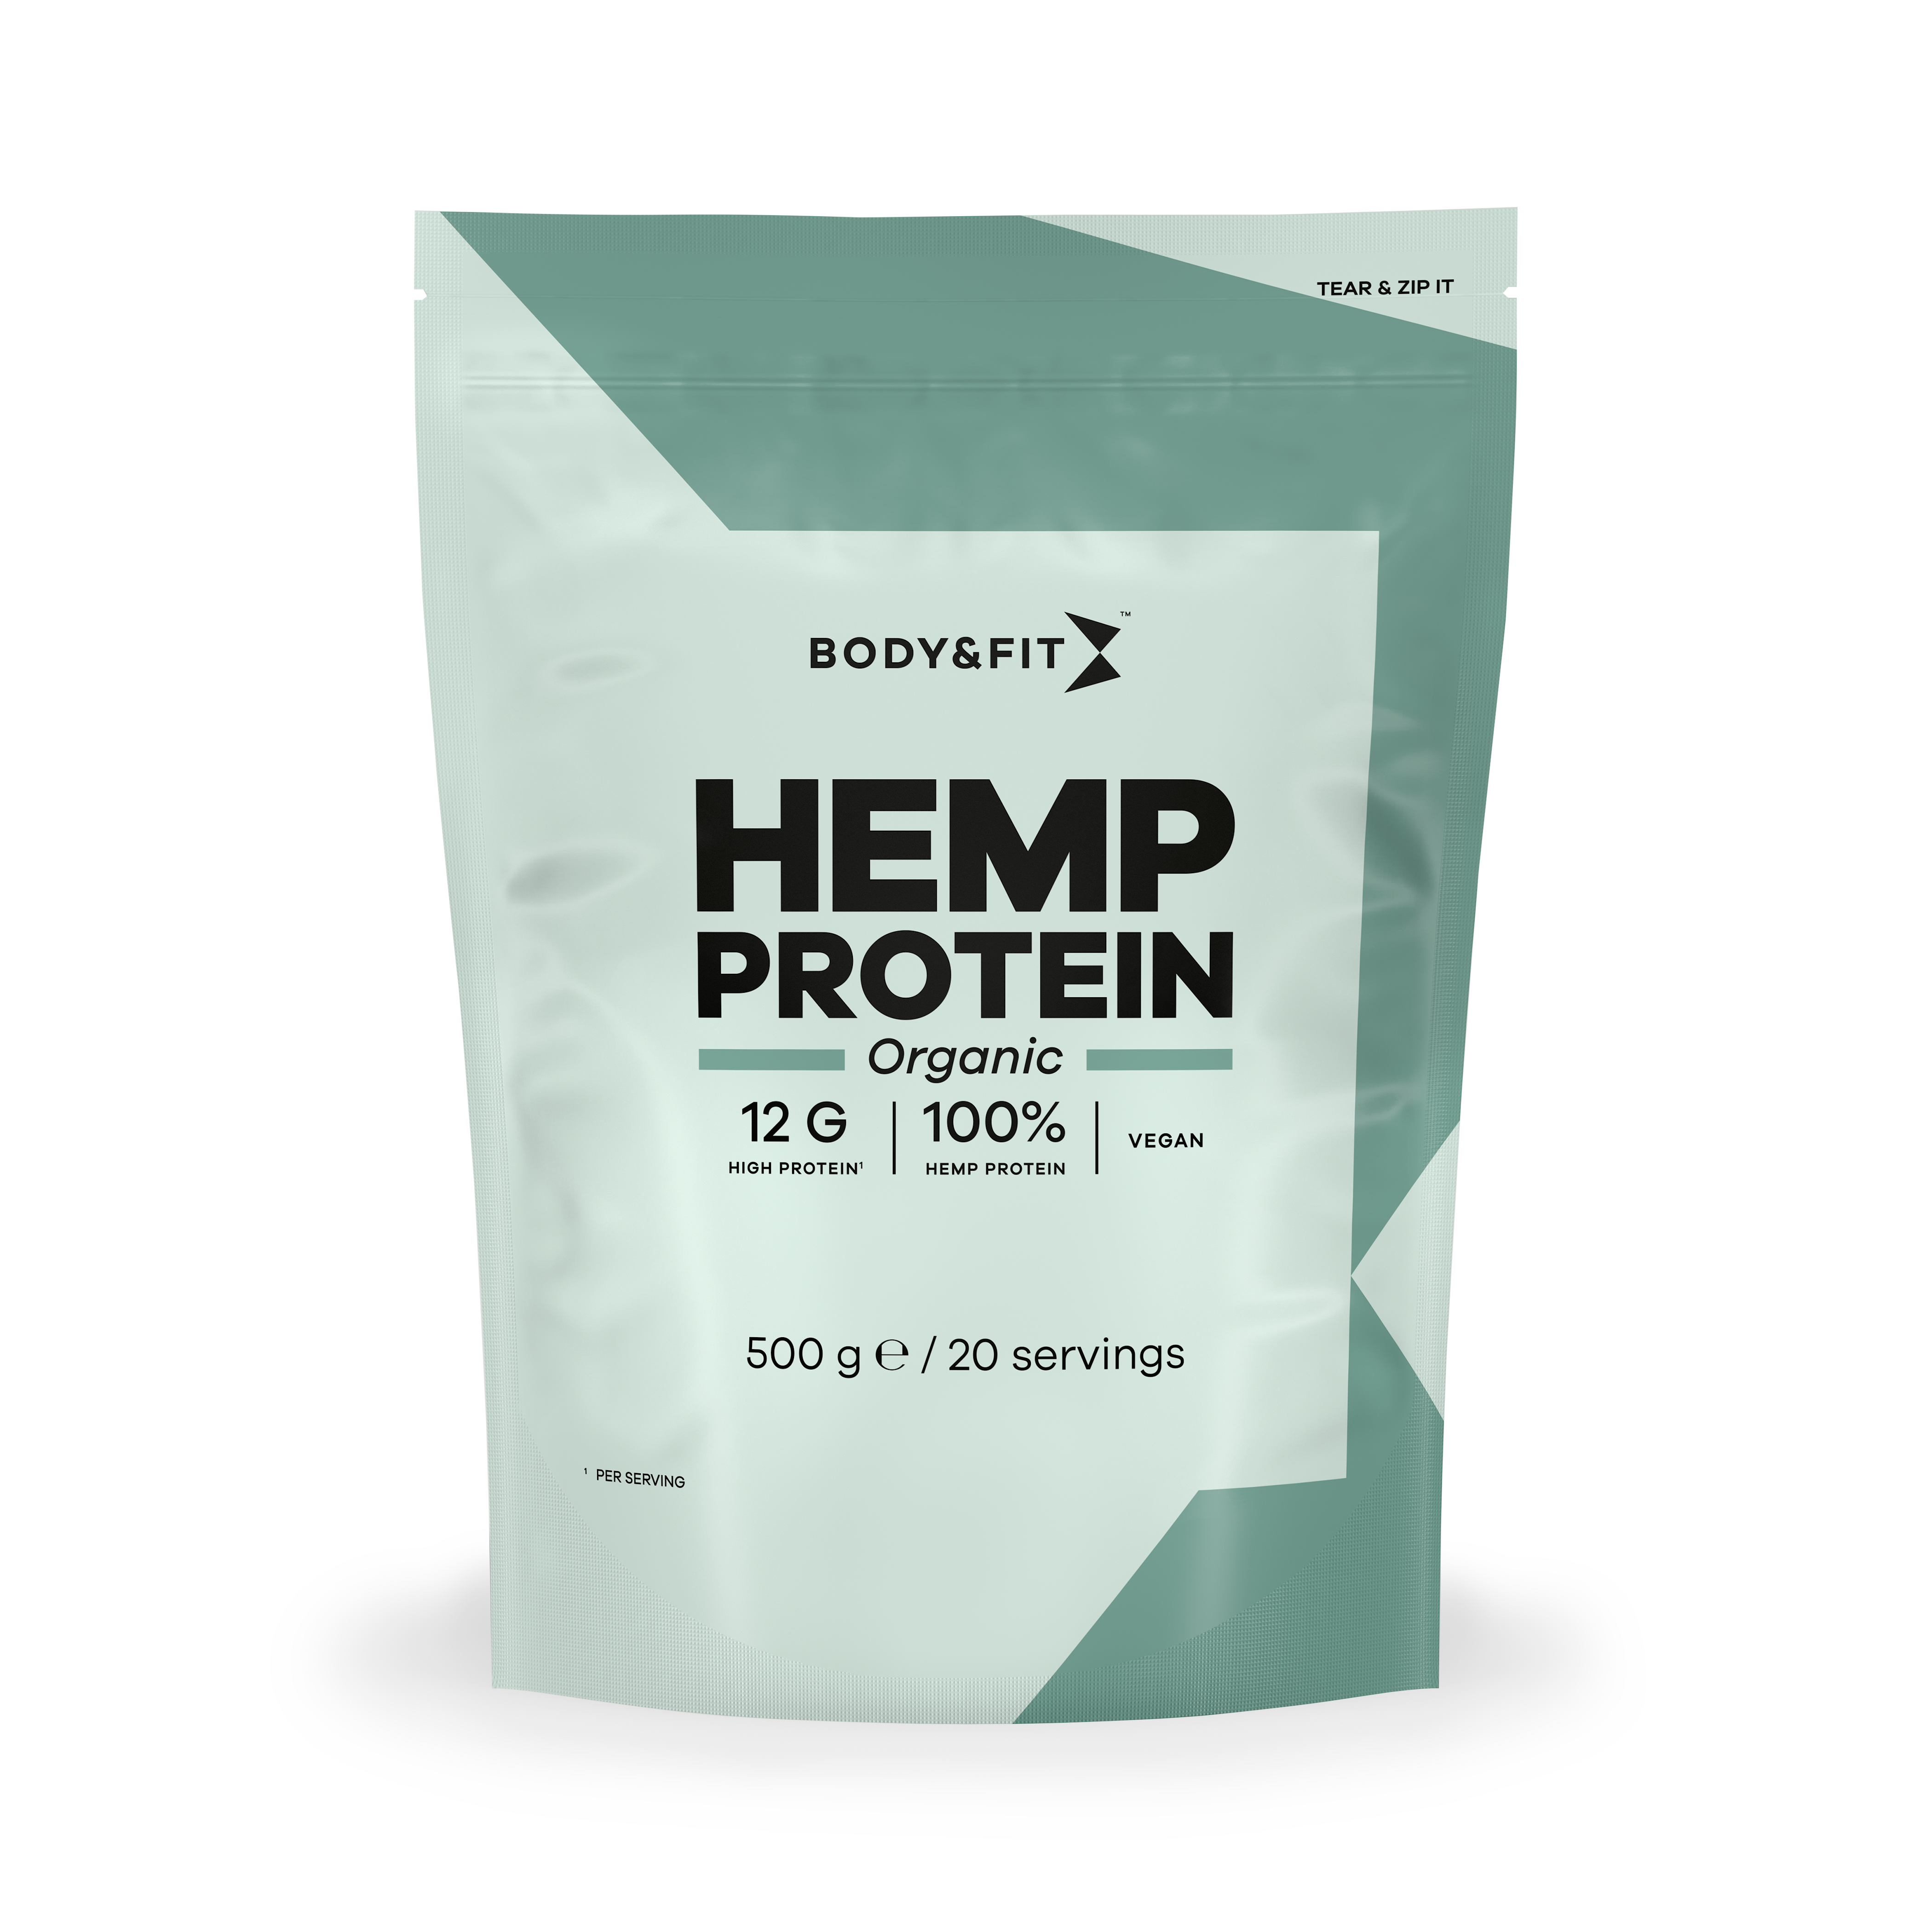 Clean Fit Plant Protein Natural, Vegan Protein